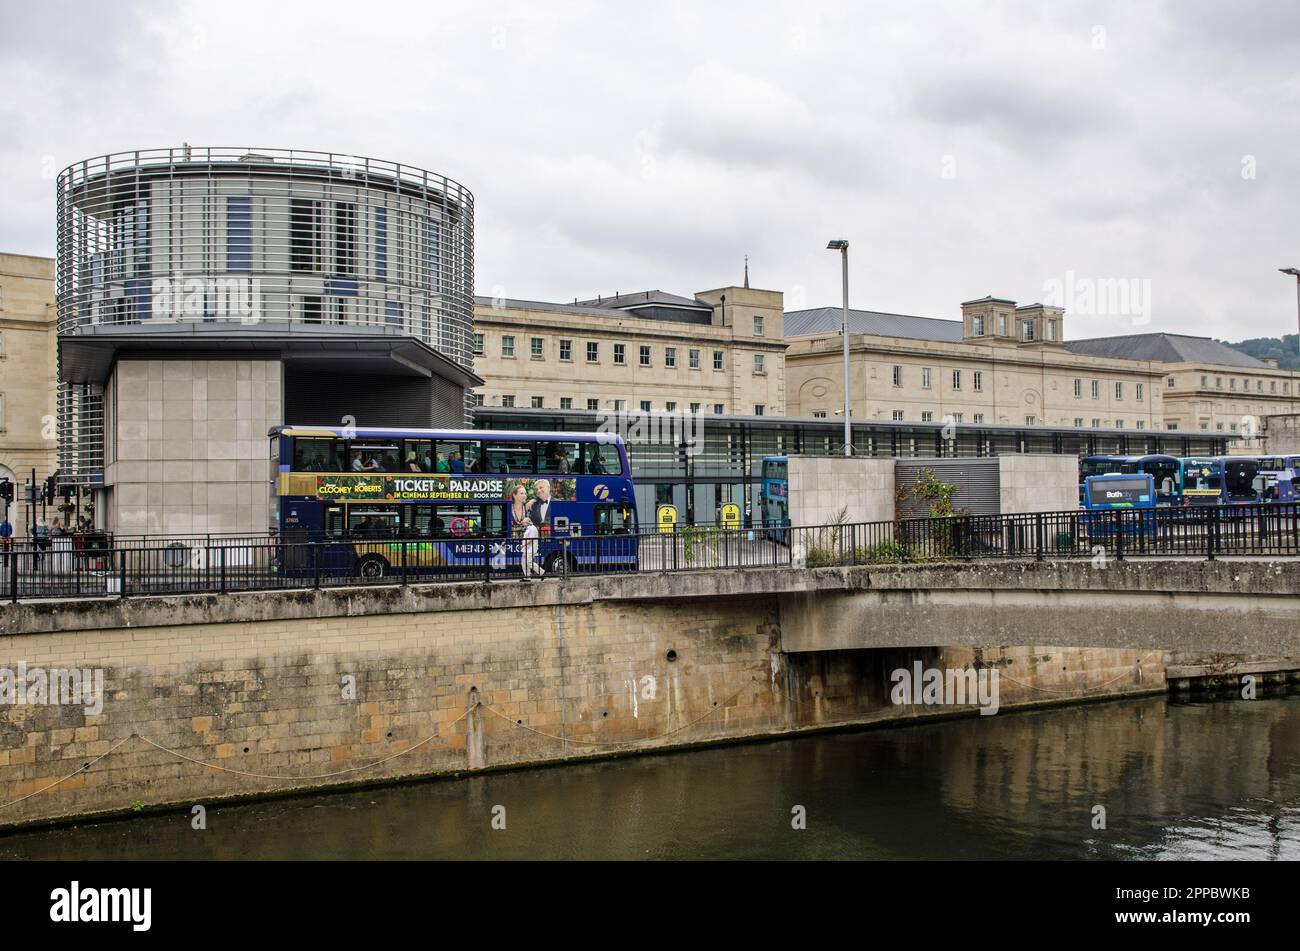 Bath, UK - September 3, 2022: View of the main bus station in Bath, Somerset, as seen from across the River Avon on a cloudy Autumn day. Stock Photo